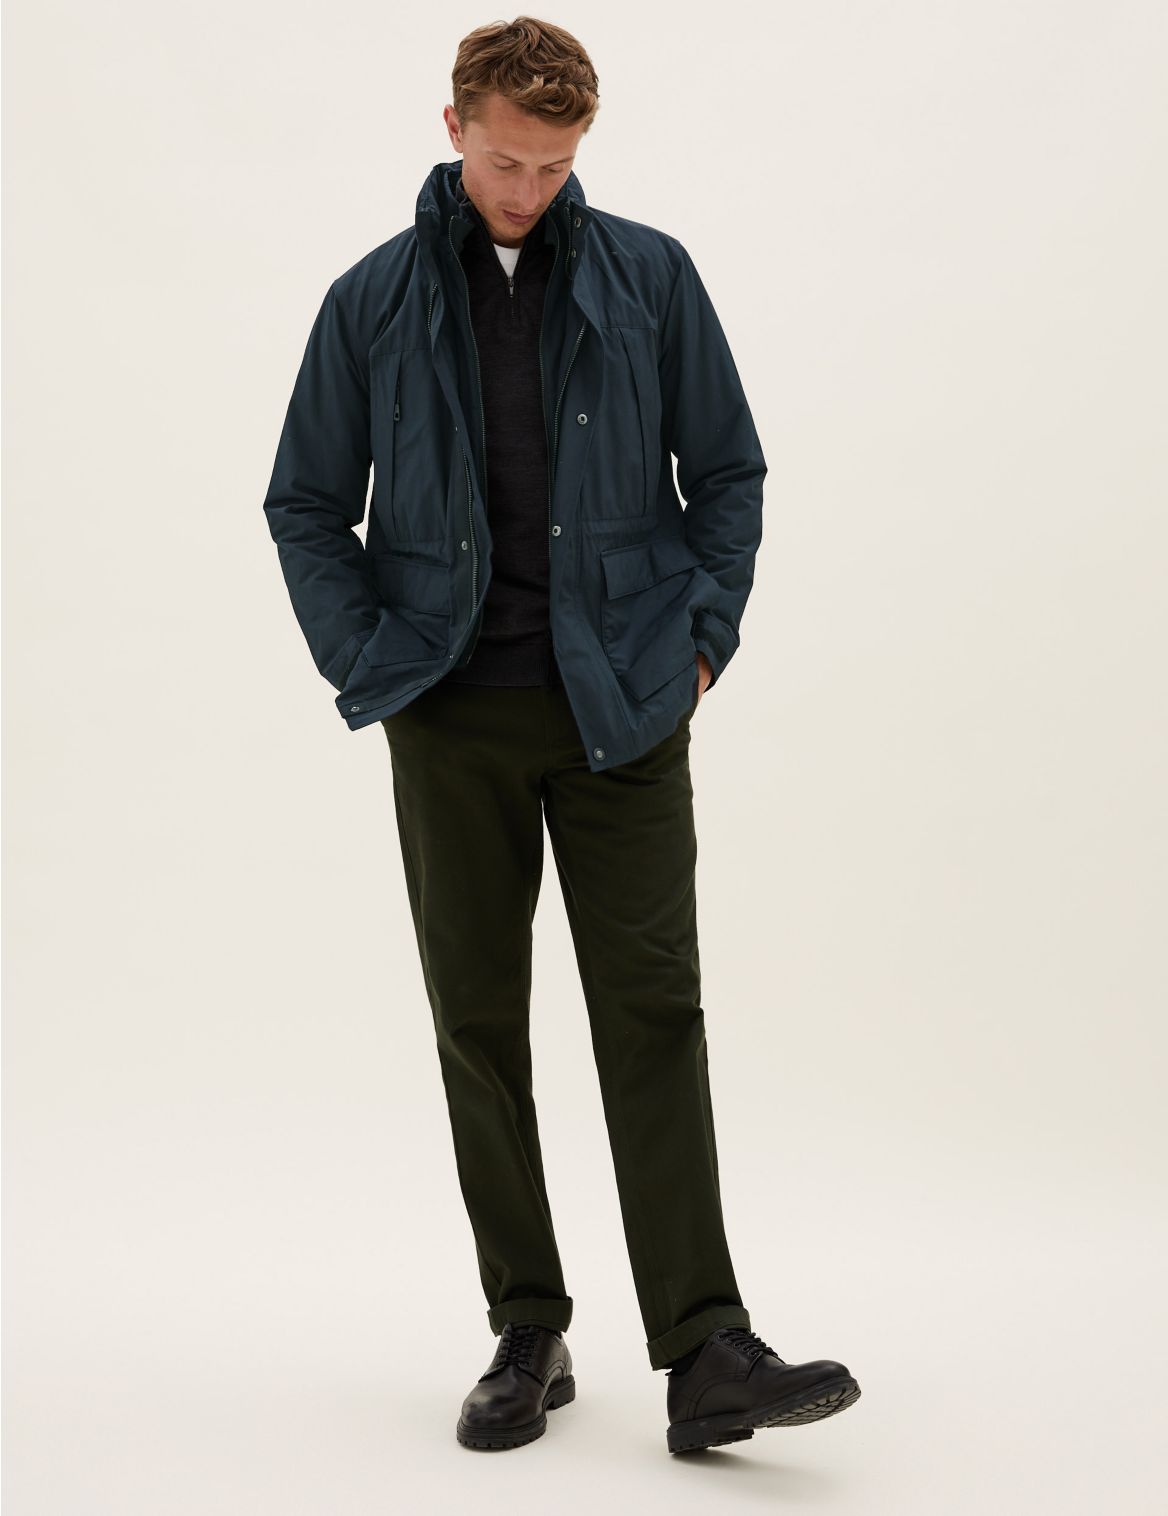 Double Collar Technical Jacket with Stormwear&trade; navy